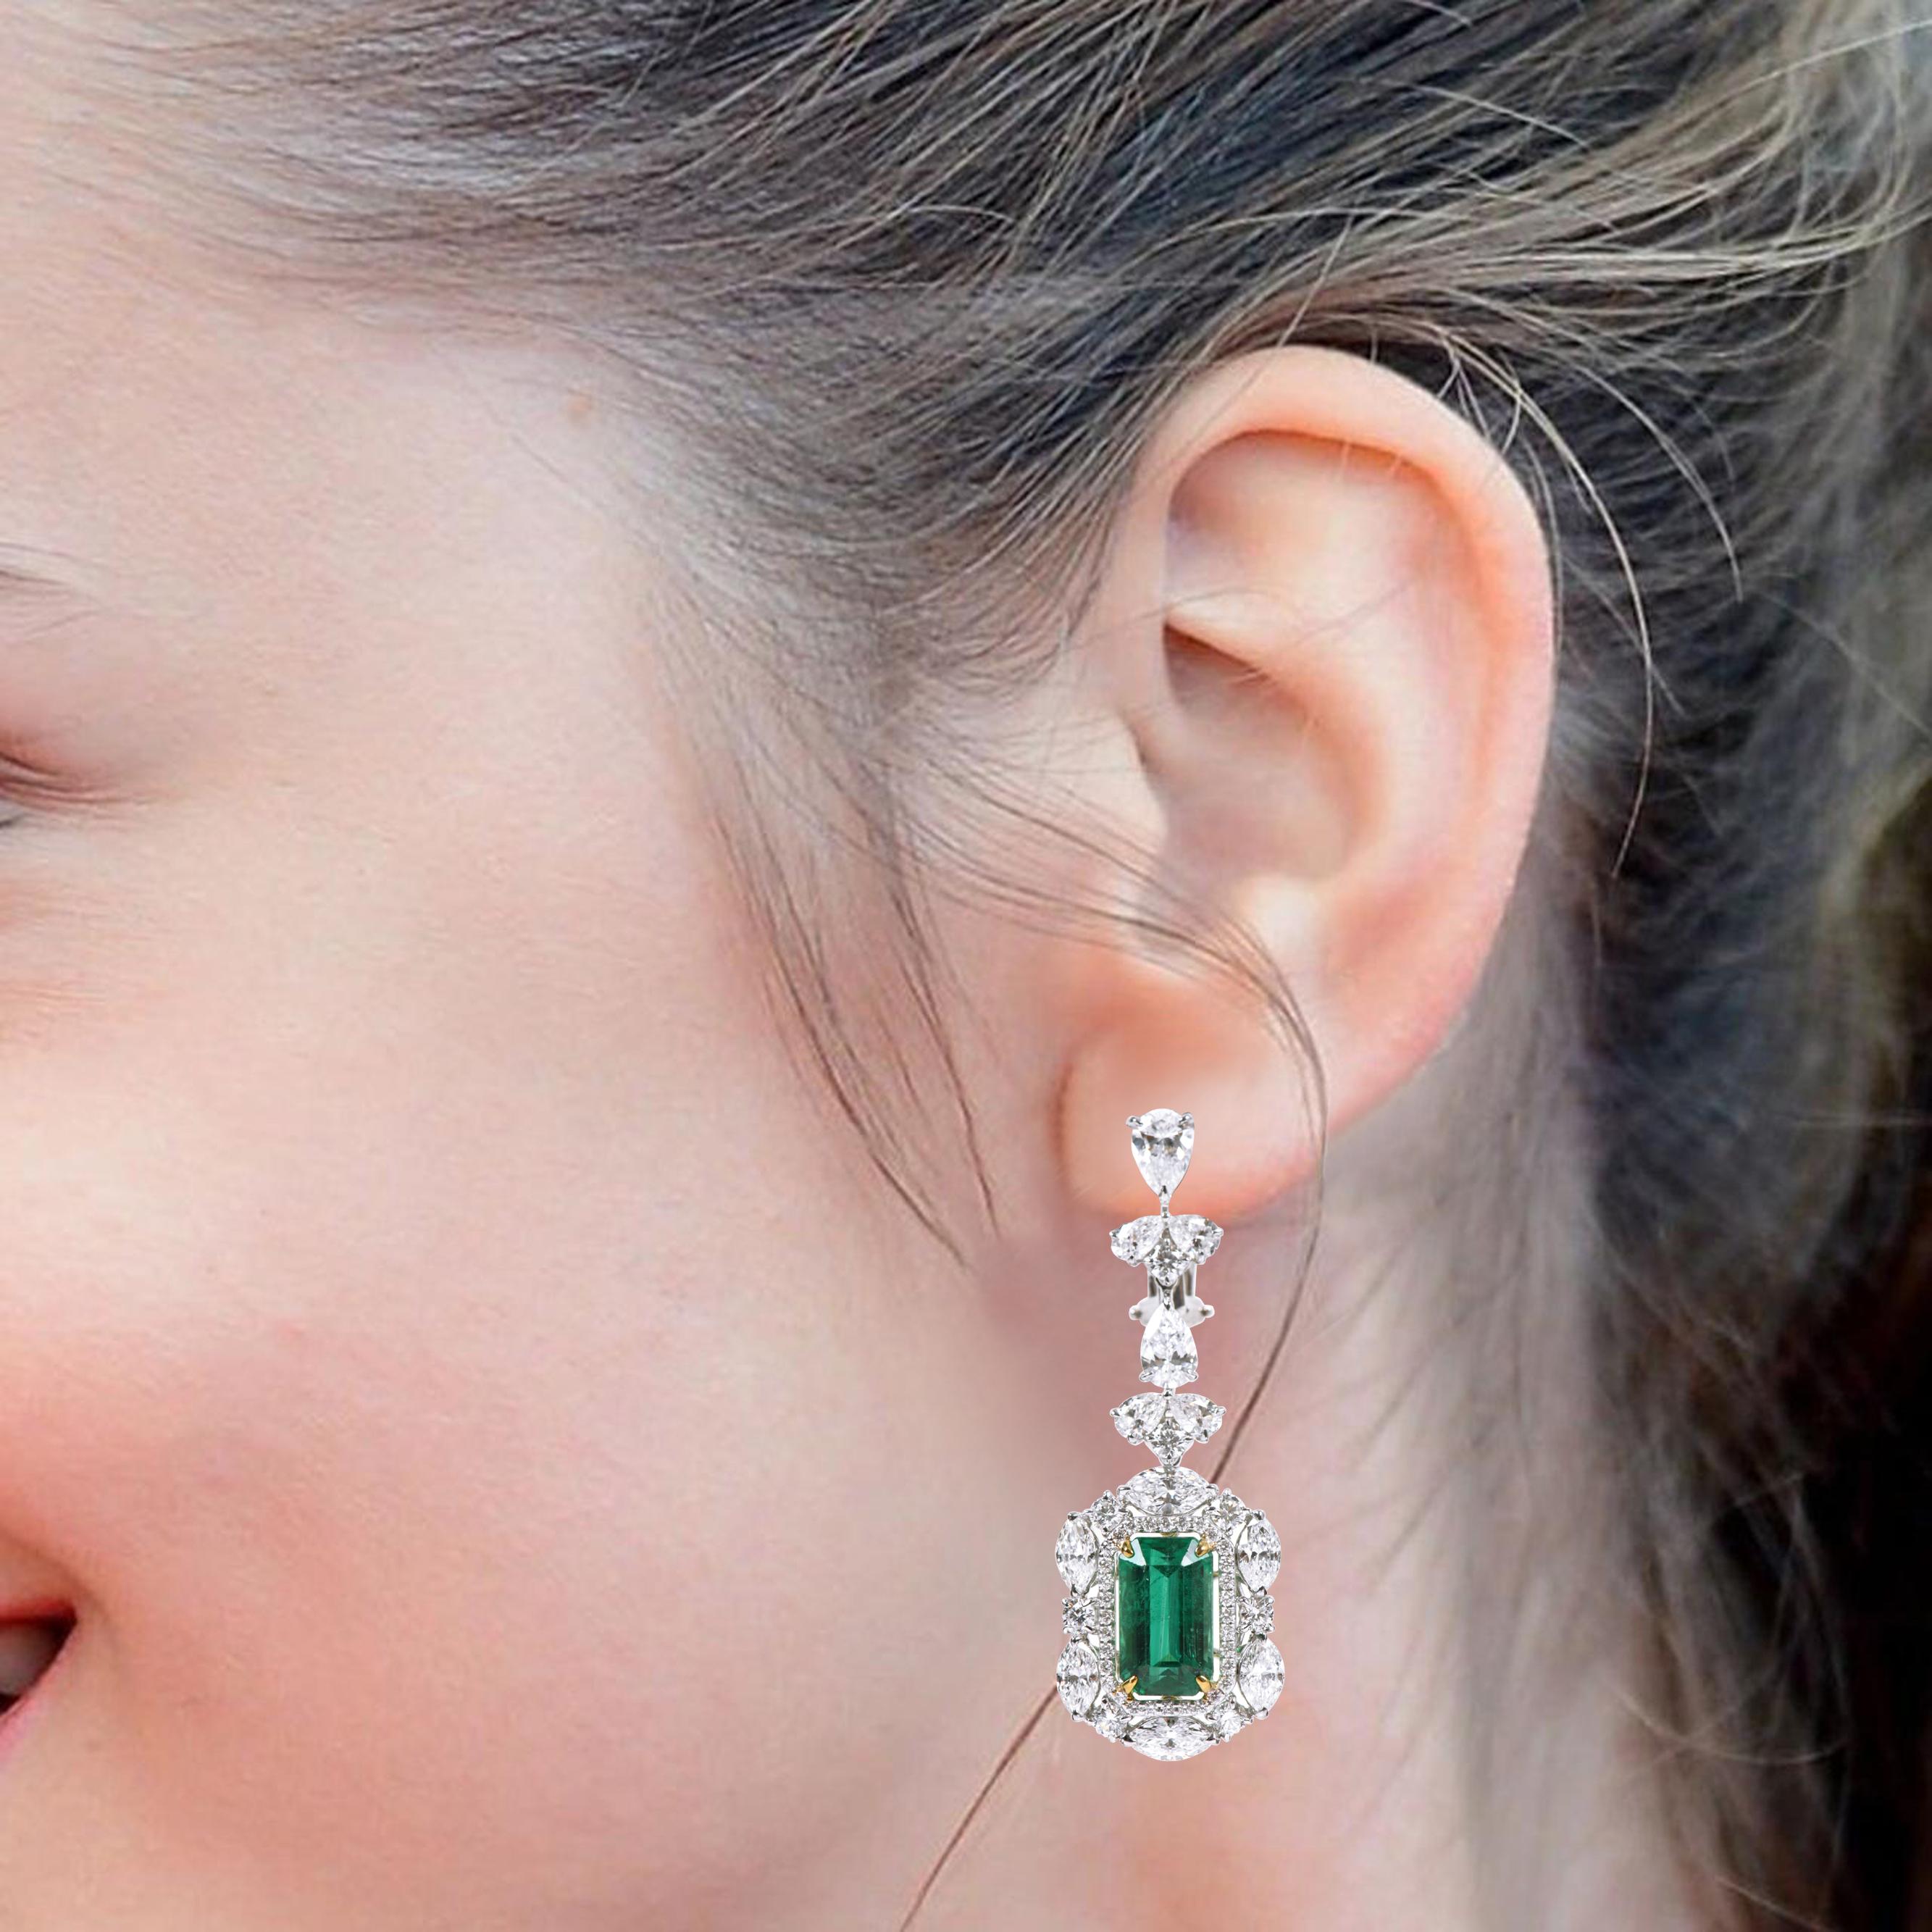 18 Karat White Gold 14.37 Carat Natural Emerald and Solitaire Diamond Cocktail Earrings

Showcasing pure artistry and craftsmanship, these majestic drop earrings are a treat and will impart an imperial touch to any look. Intricately designed with